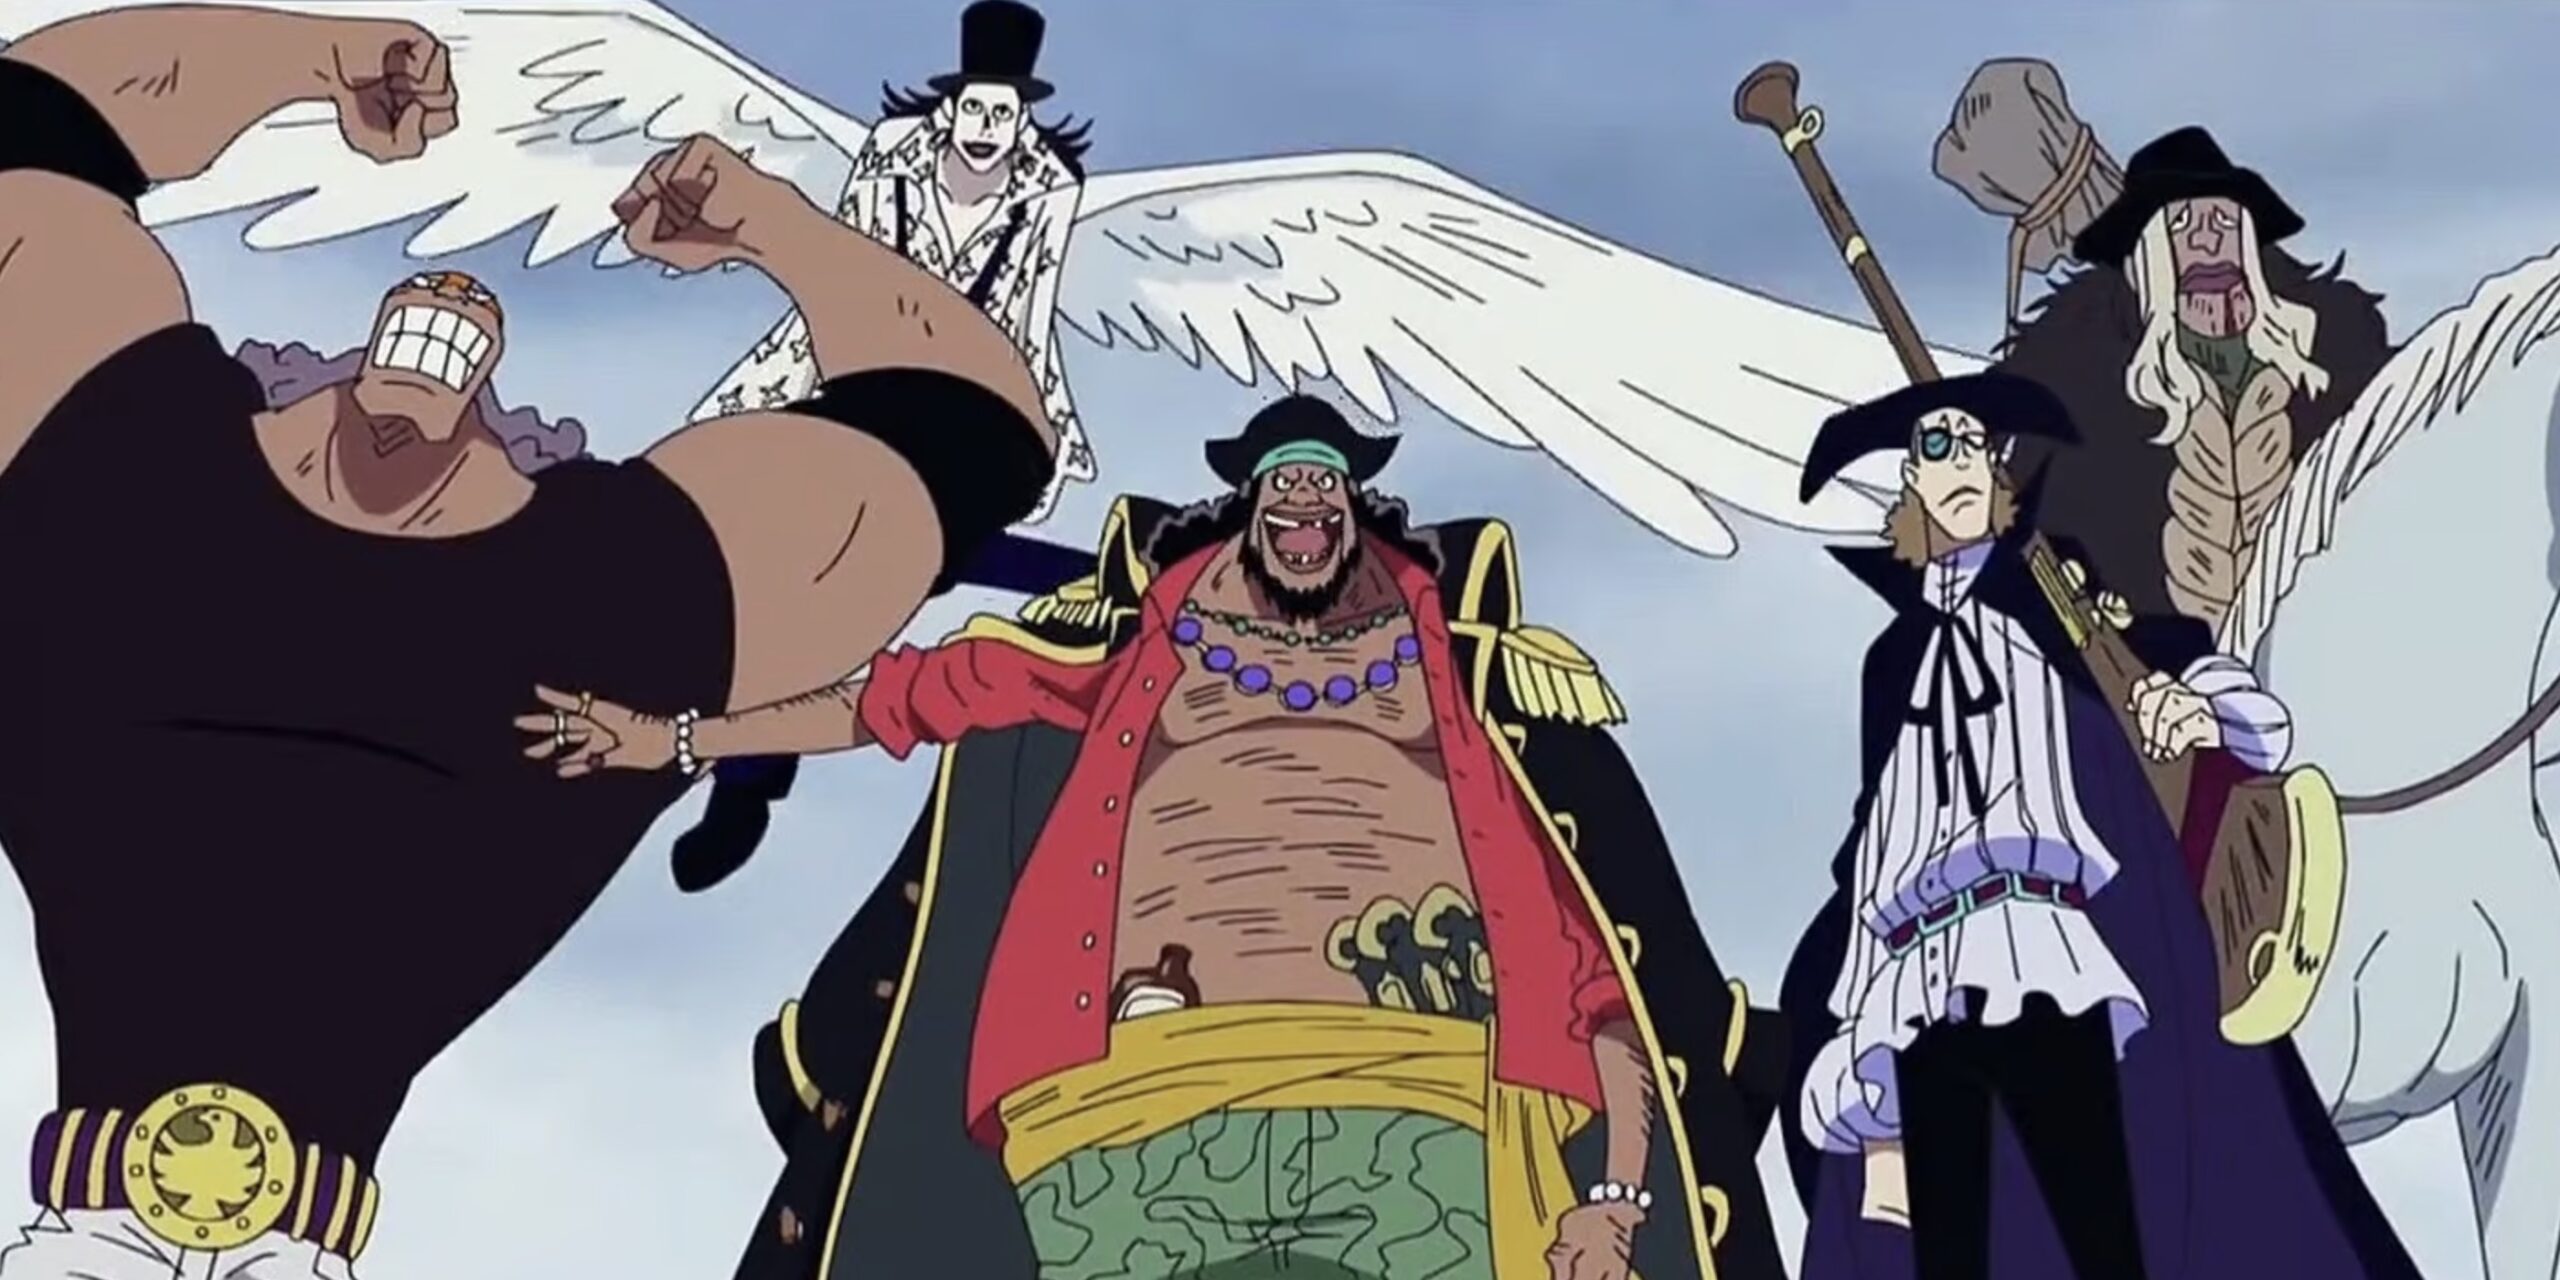 Why Did Aokiji Join Blackbeard? Explained